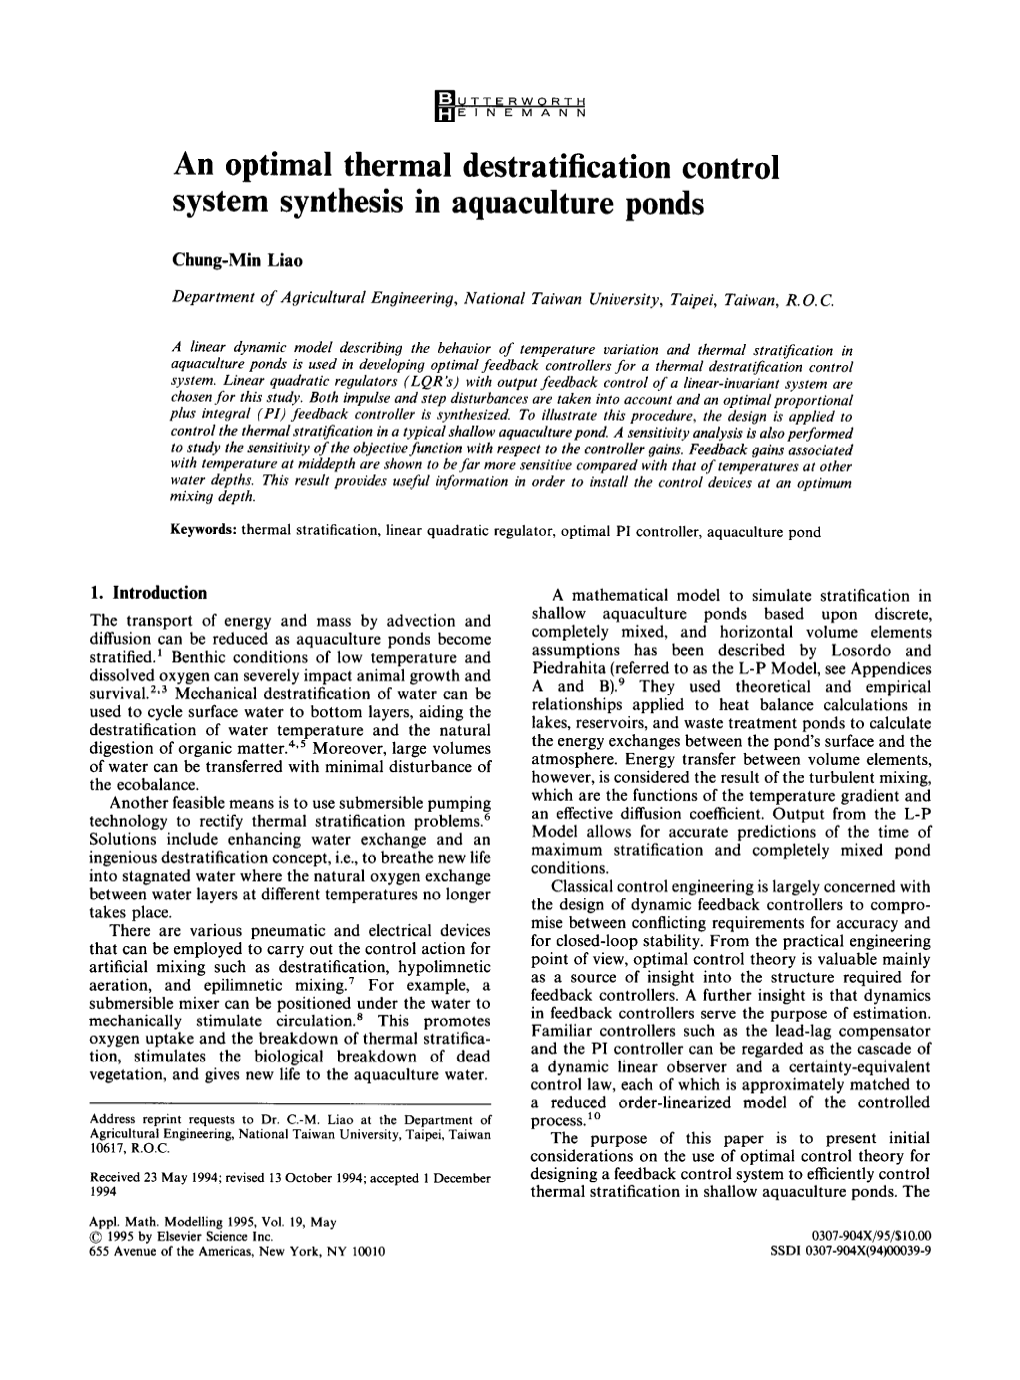 An Optimal Thermal Destratification Control System Synthesis in Aquaculture Ponds